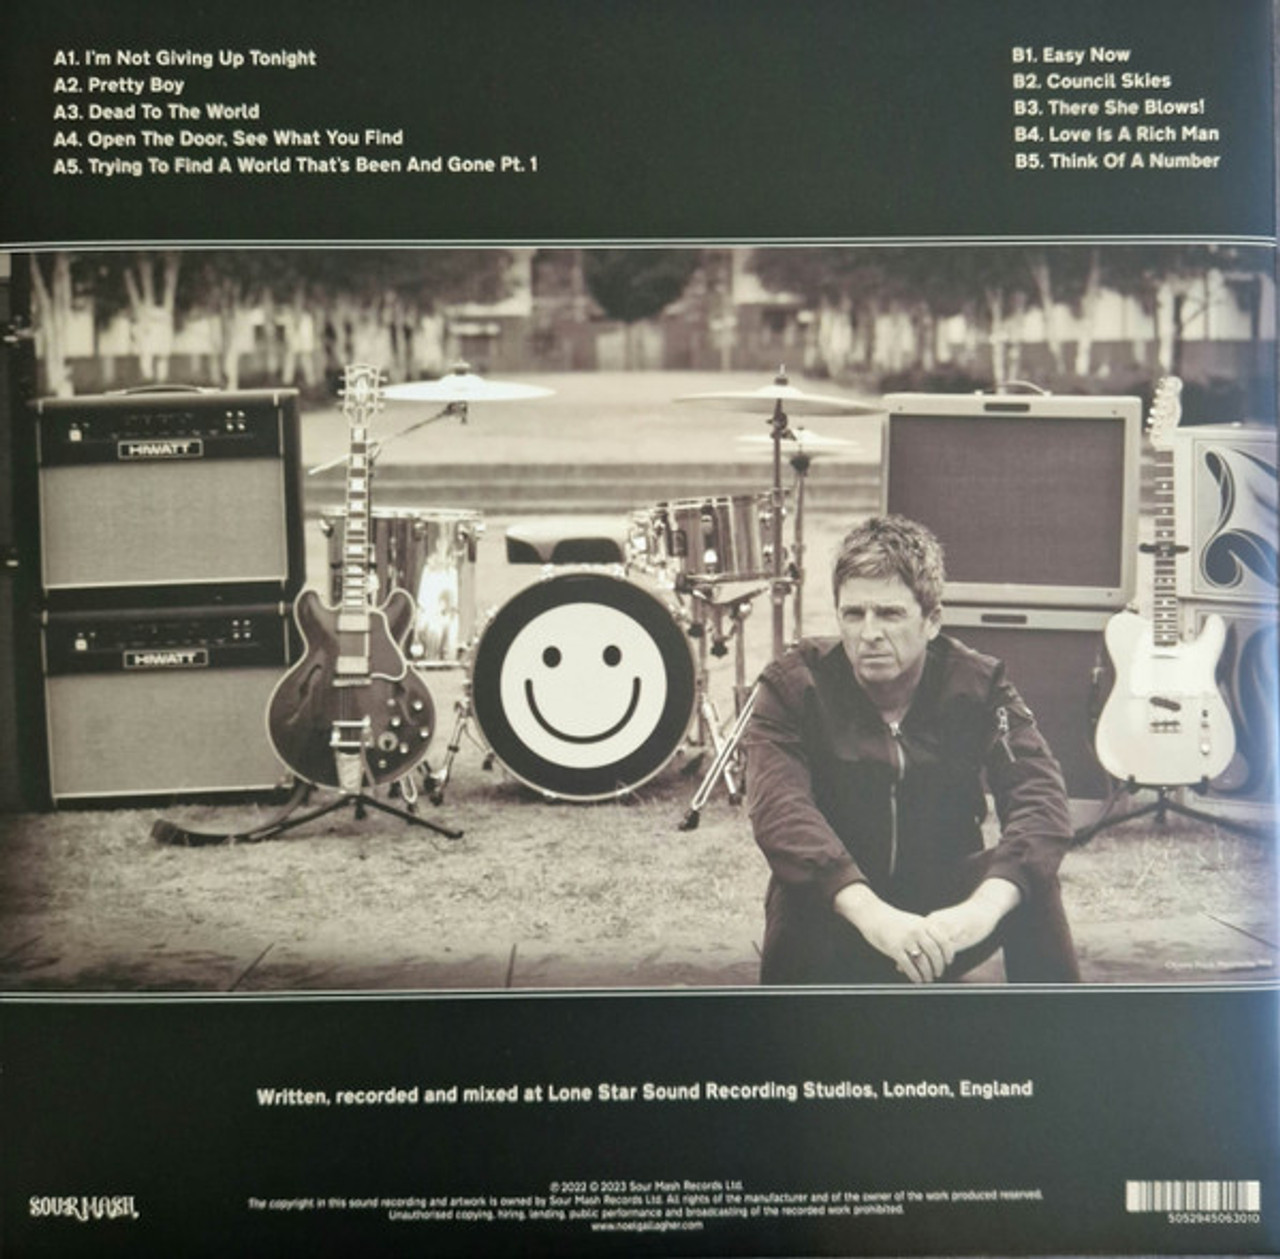 Council Skies - Noel Gallagher's High Flying Birds (#5052945063010)